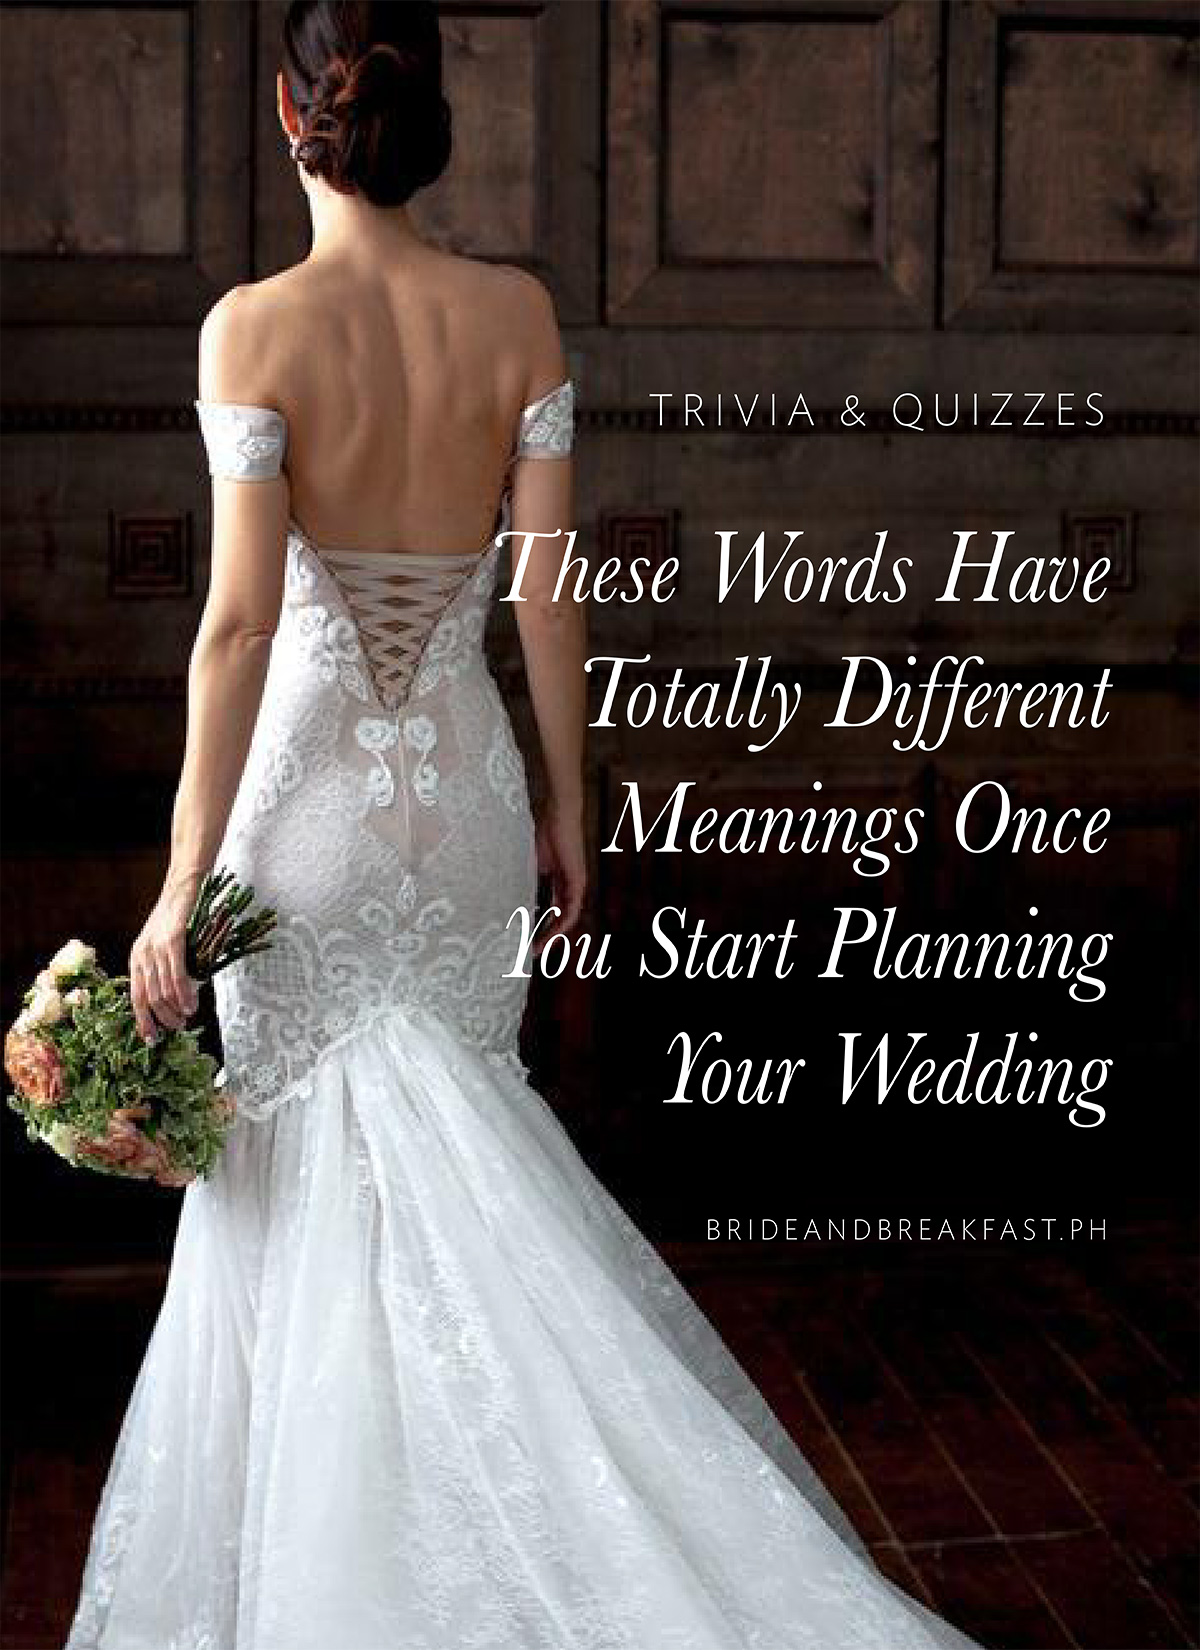 These Words Have Totally Different Meanings Once You Start Planning Your Wedding